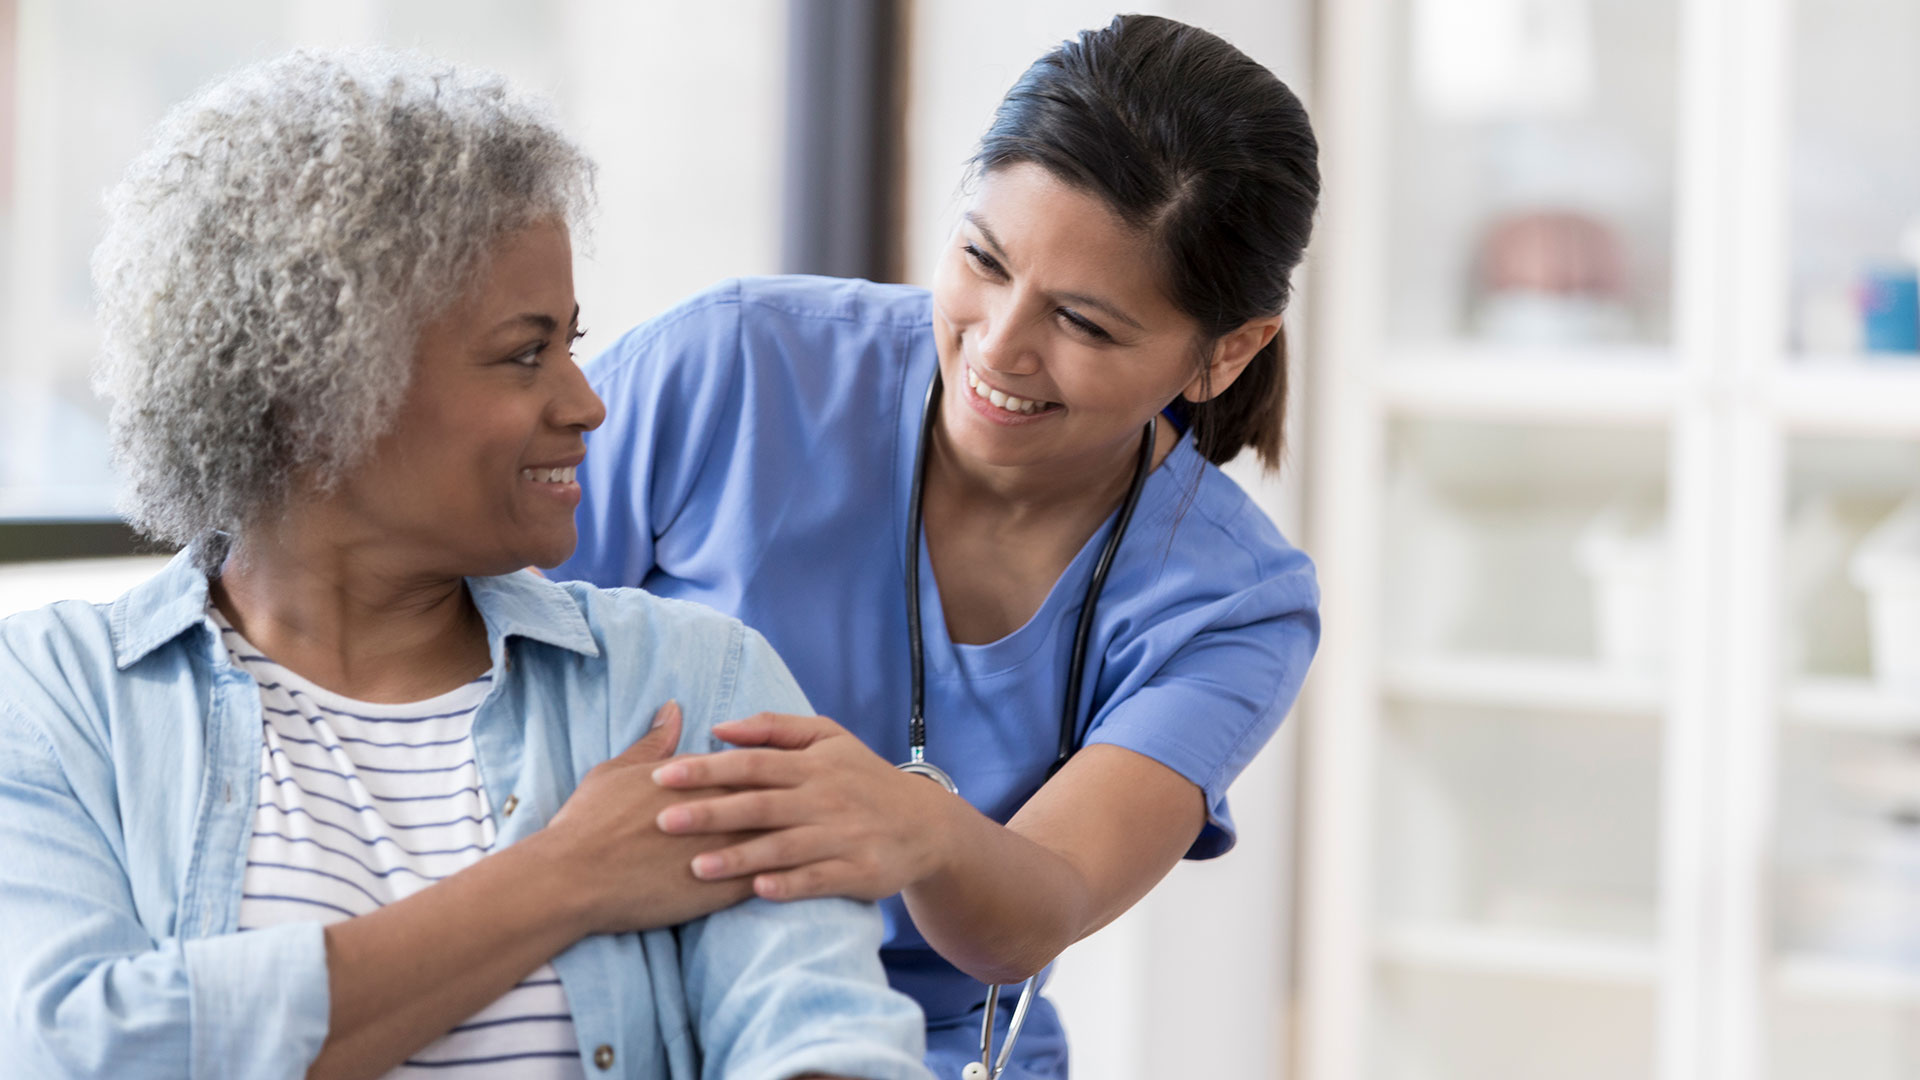 Photo of woman and health care worker interacting